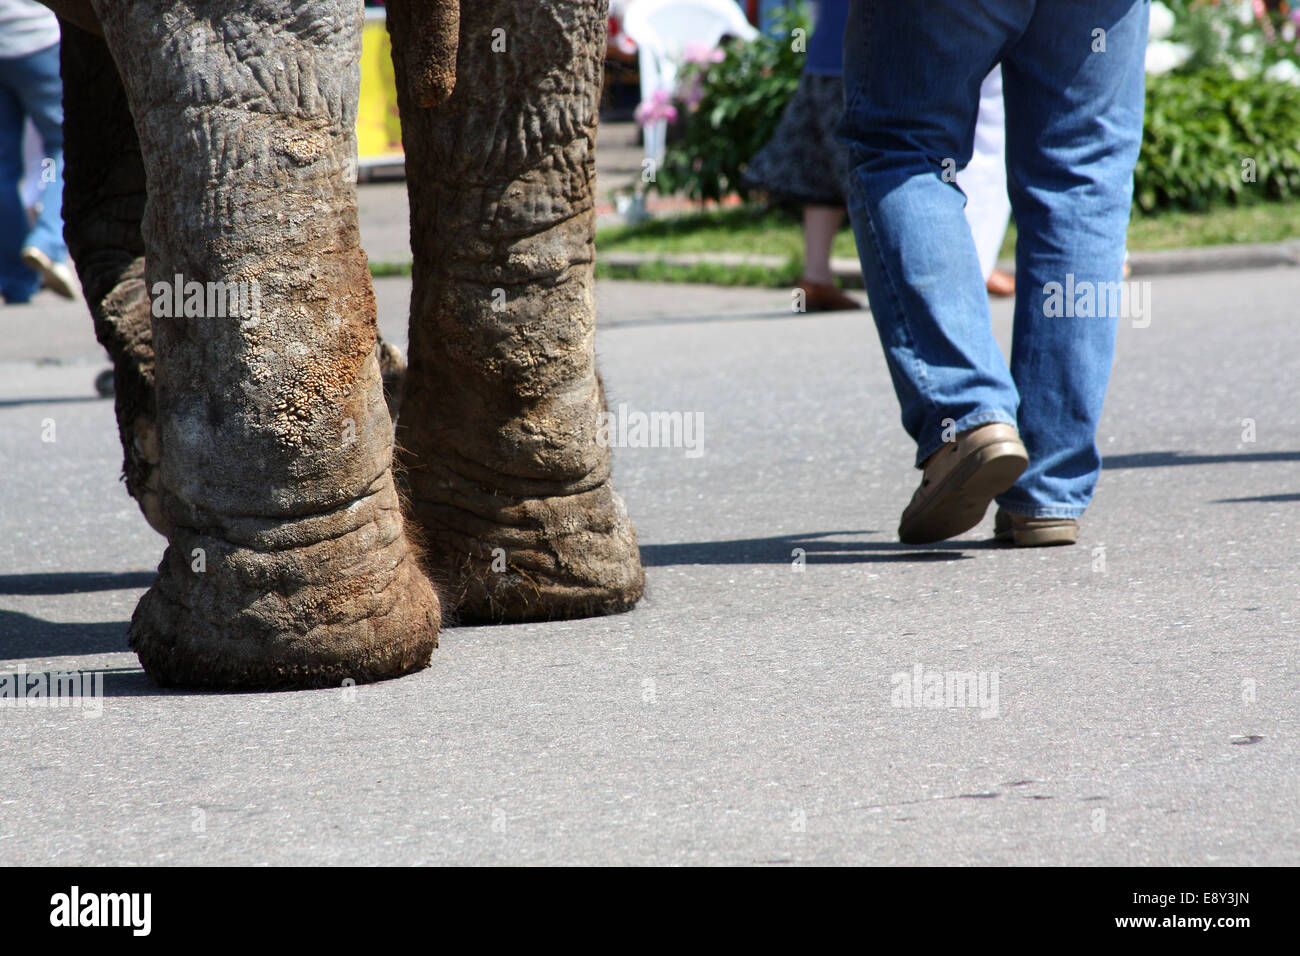 man and an elephant walking down the street Stock Photo